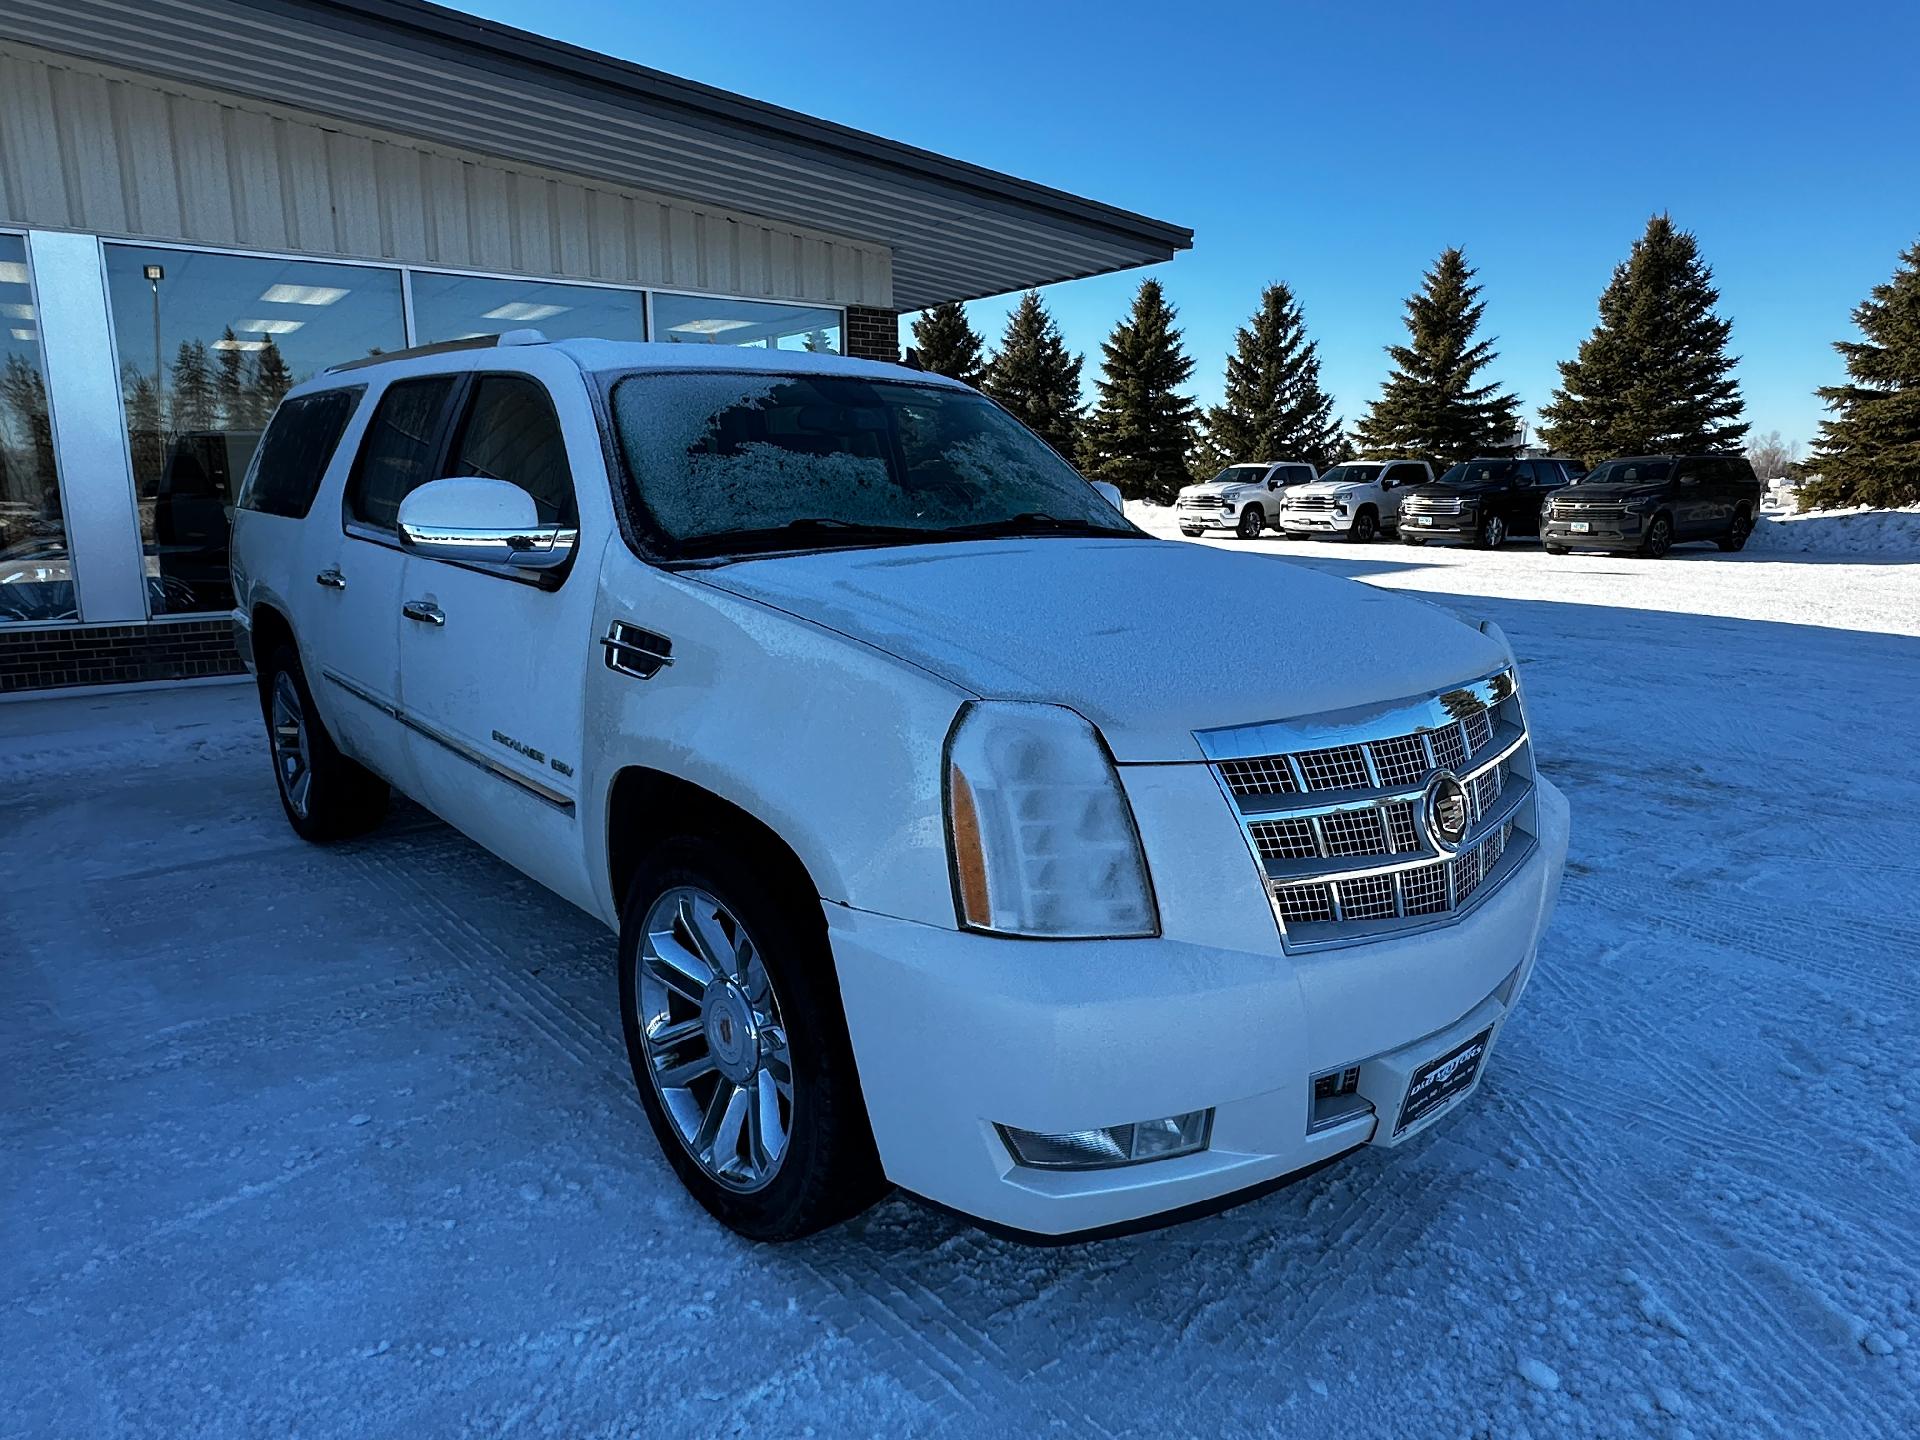 Used 2014 Cadillac Escalade ESV Platinum Edition with VIN 1GYS4KEF3ER188757 for sale in Langdon, ND